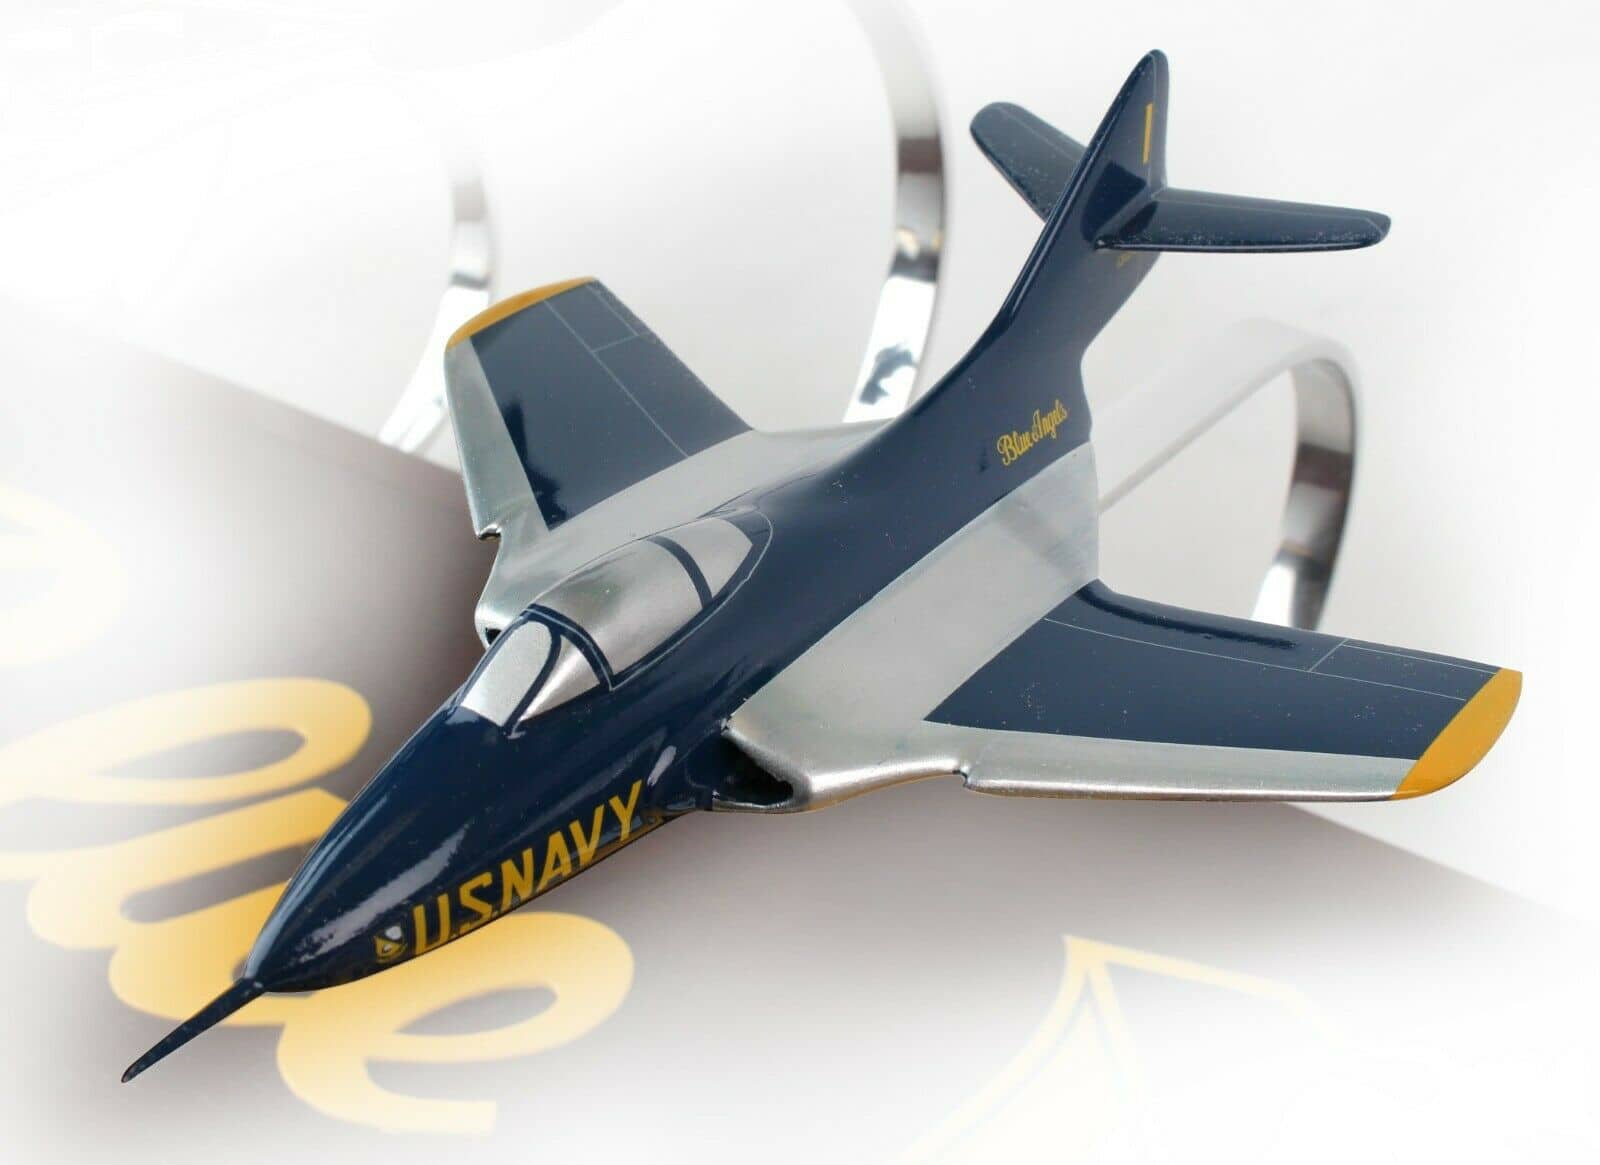 ALDO Creative Arts Collectibles Scale Model 36.00" x 13.00" x 13.00" / NEW / wood Airplane USAF  Blue Angels Flight Demonstration Squadron Wood Model 8 Planes Set Collection